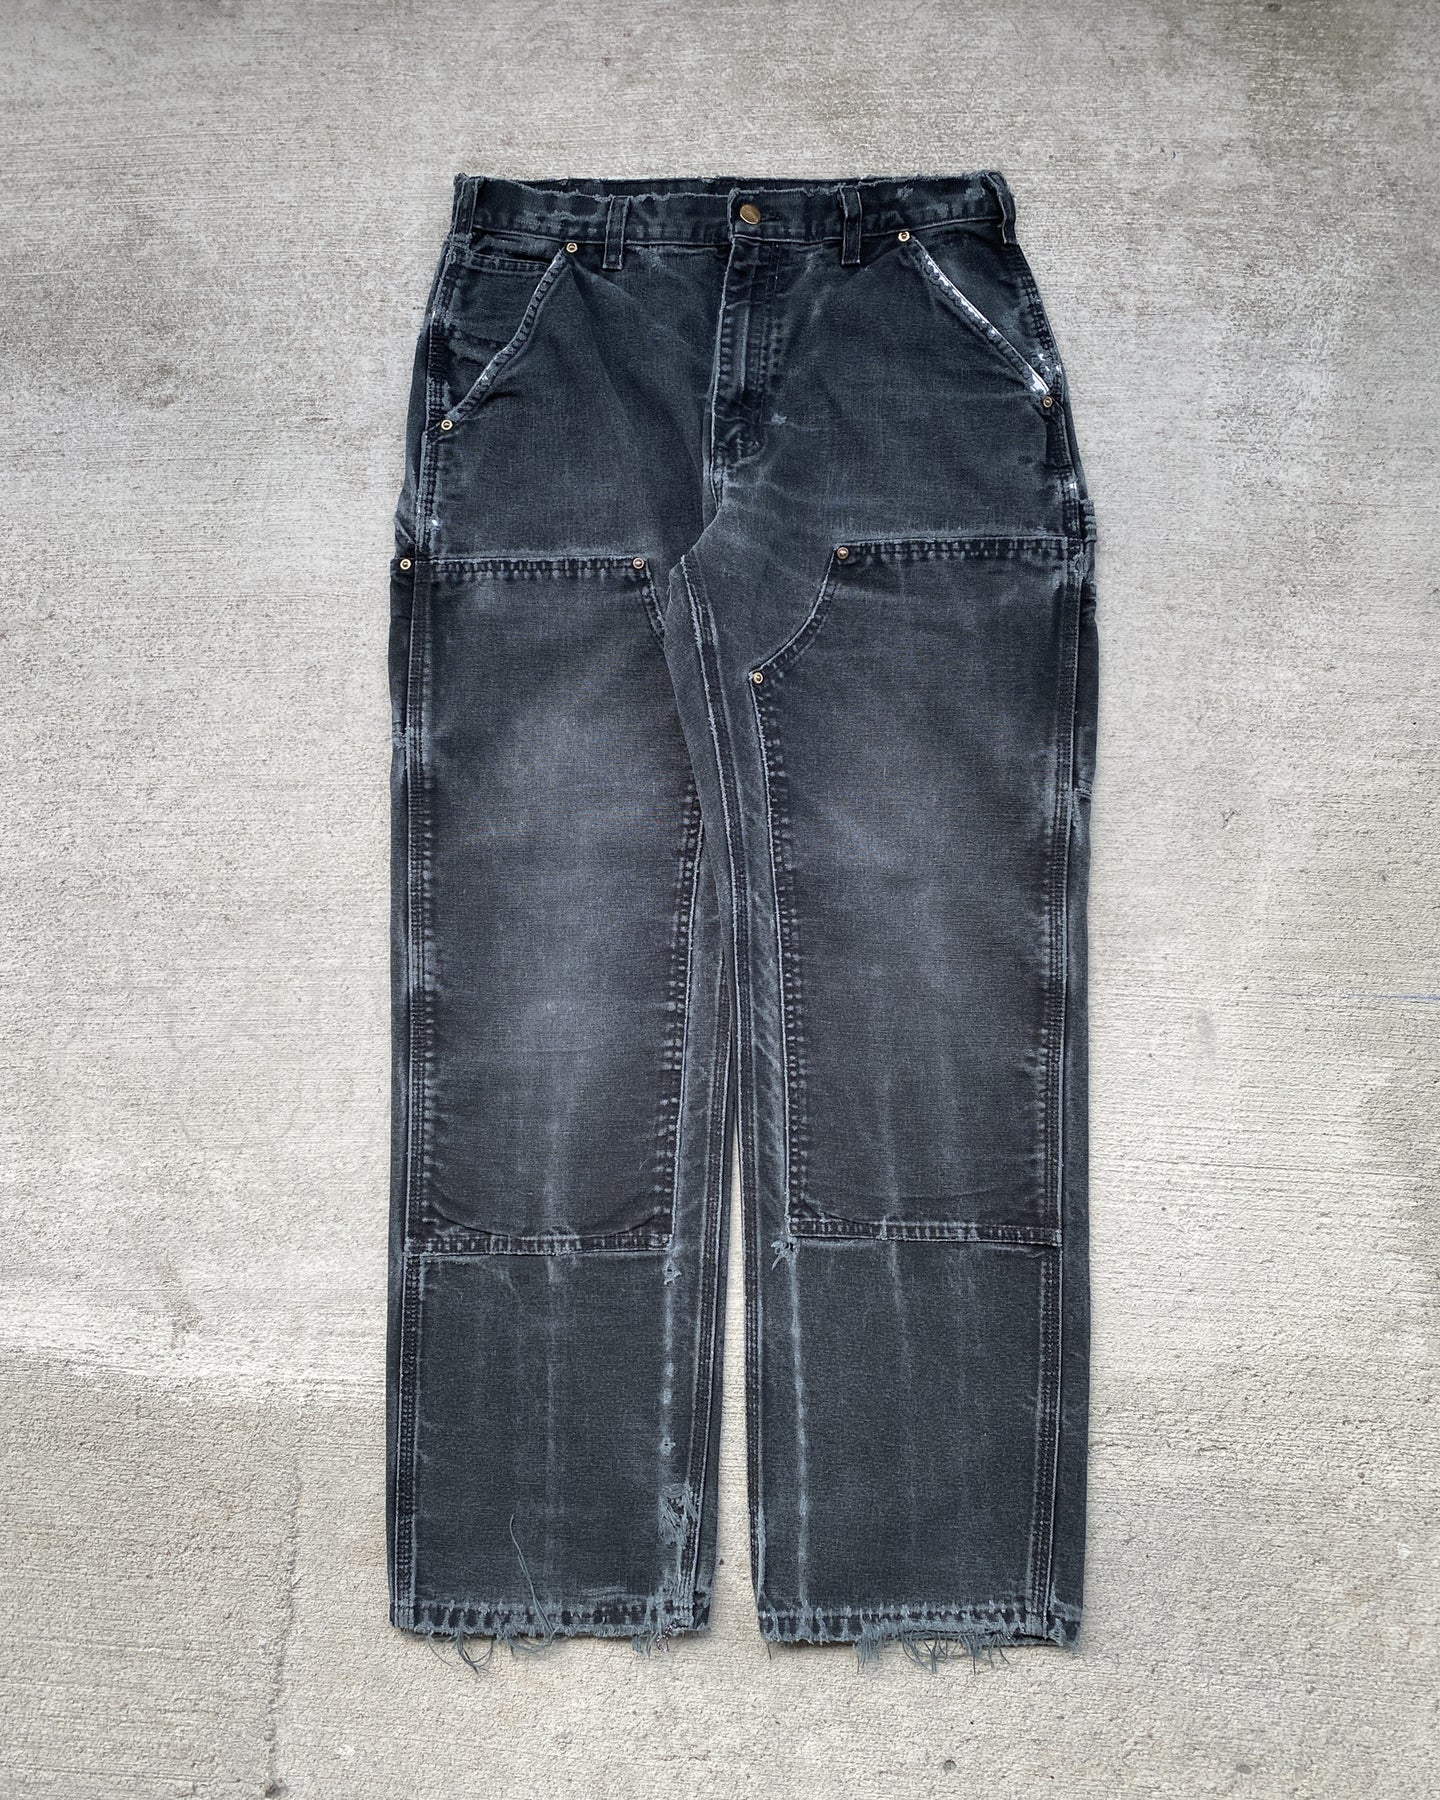 1990s Carhartt Faded and Distressed Black Double Knee Pants - Size 33 x 30